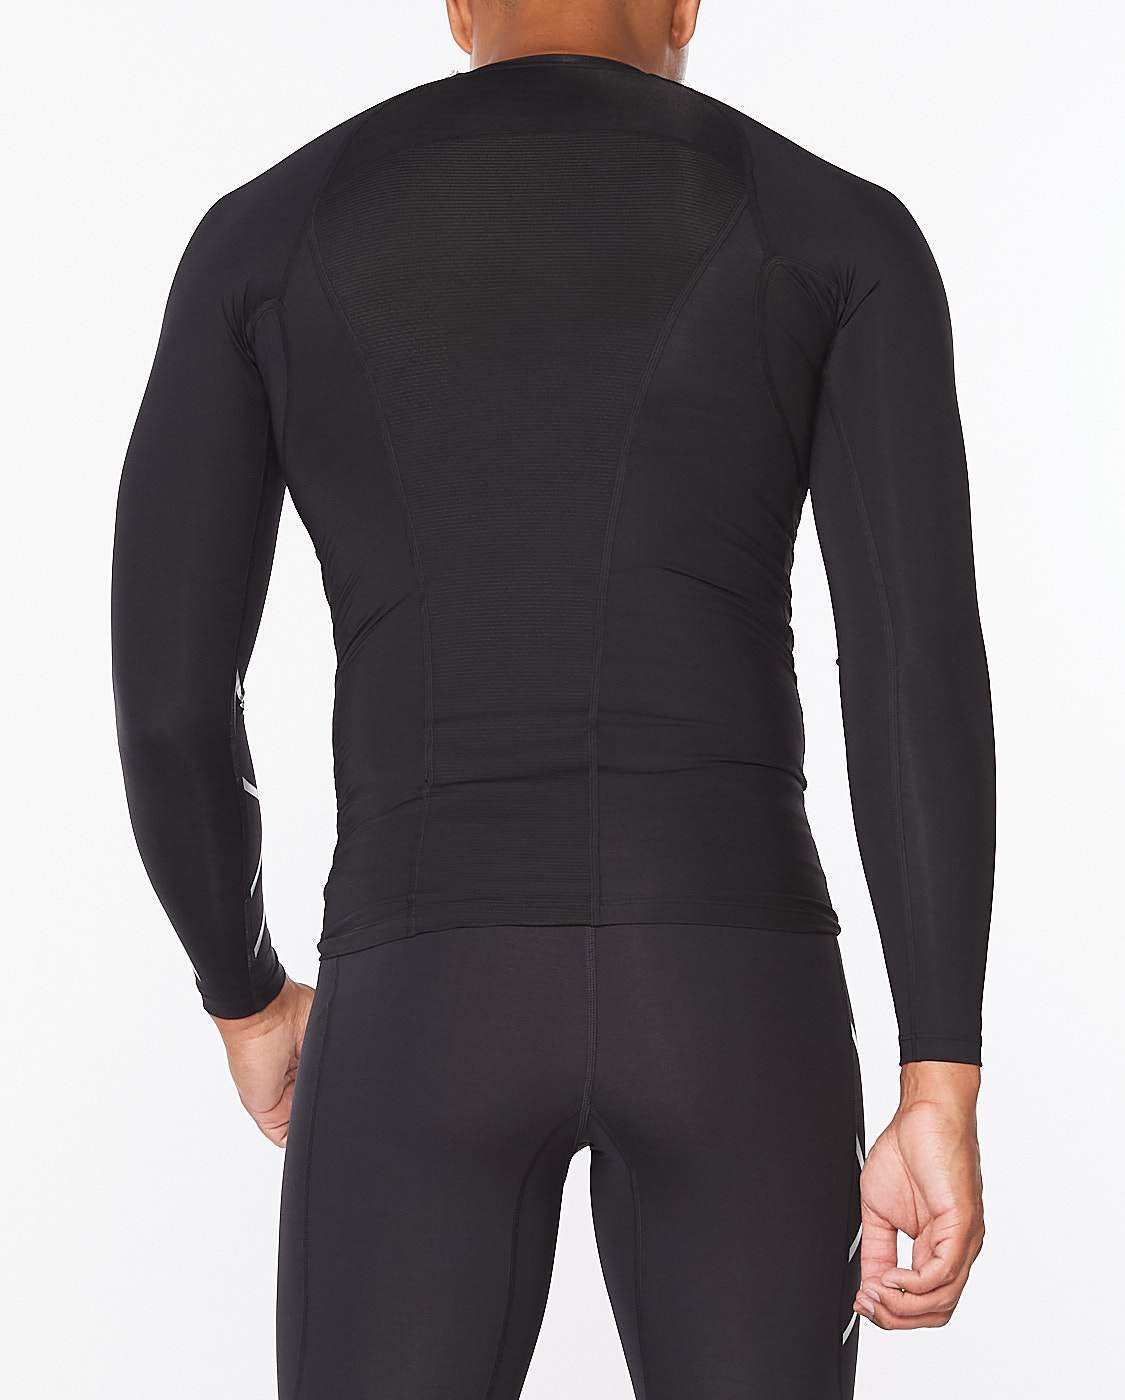 Mens Core Compression Fitted Long Sleeve Top